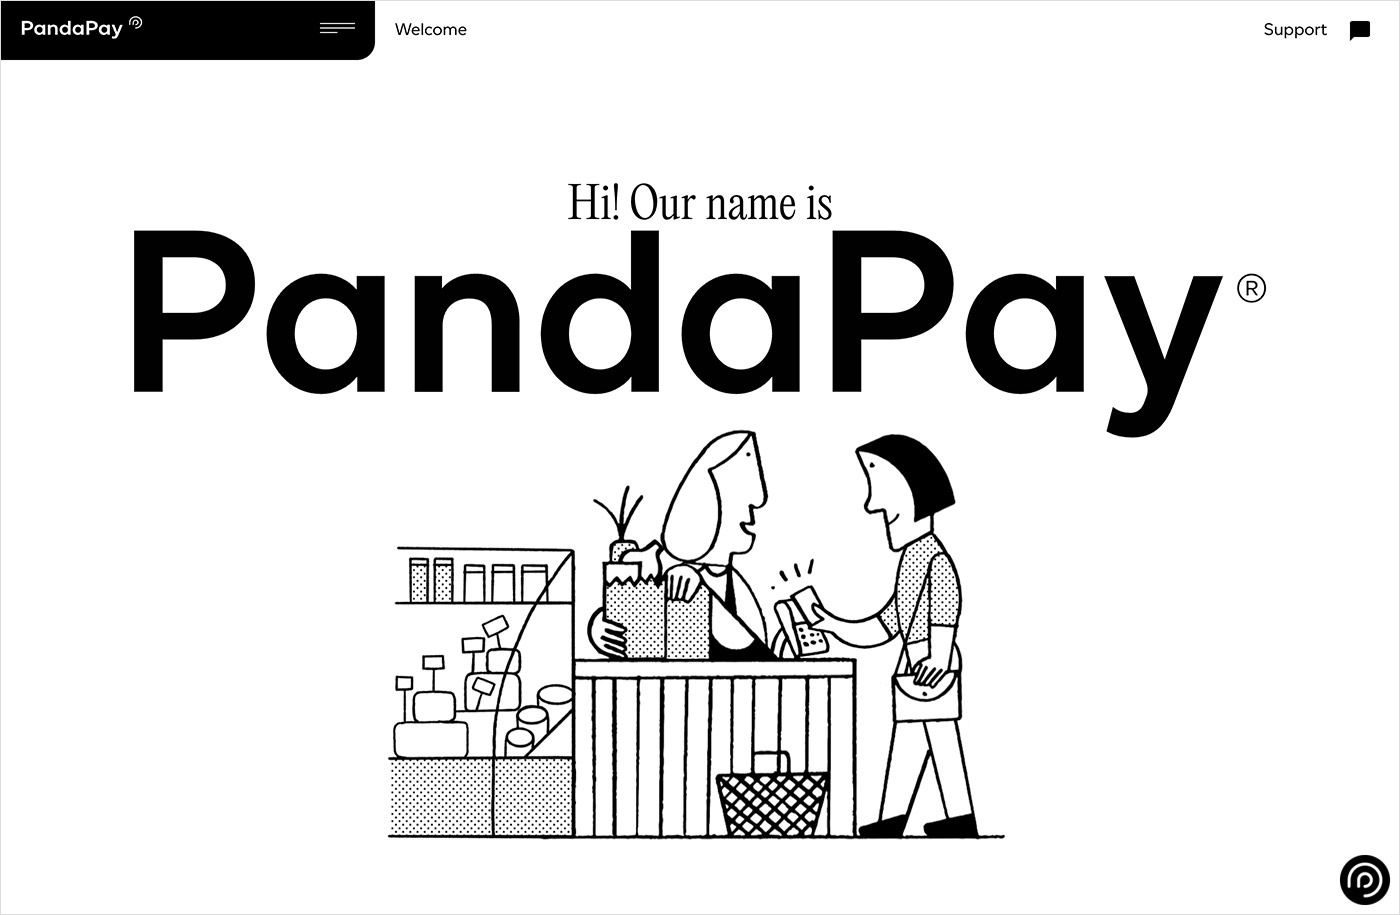 PandaPay: Transparent and Caring Payment Solutionsウェブサイトの画面キャプチャ画像